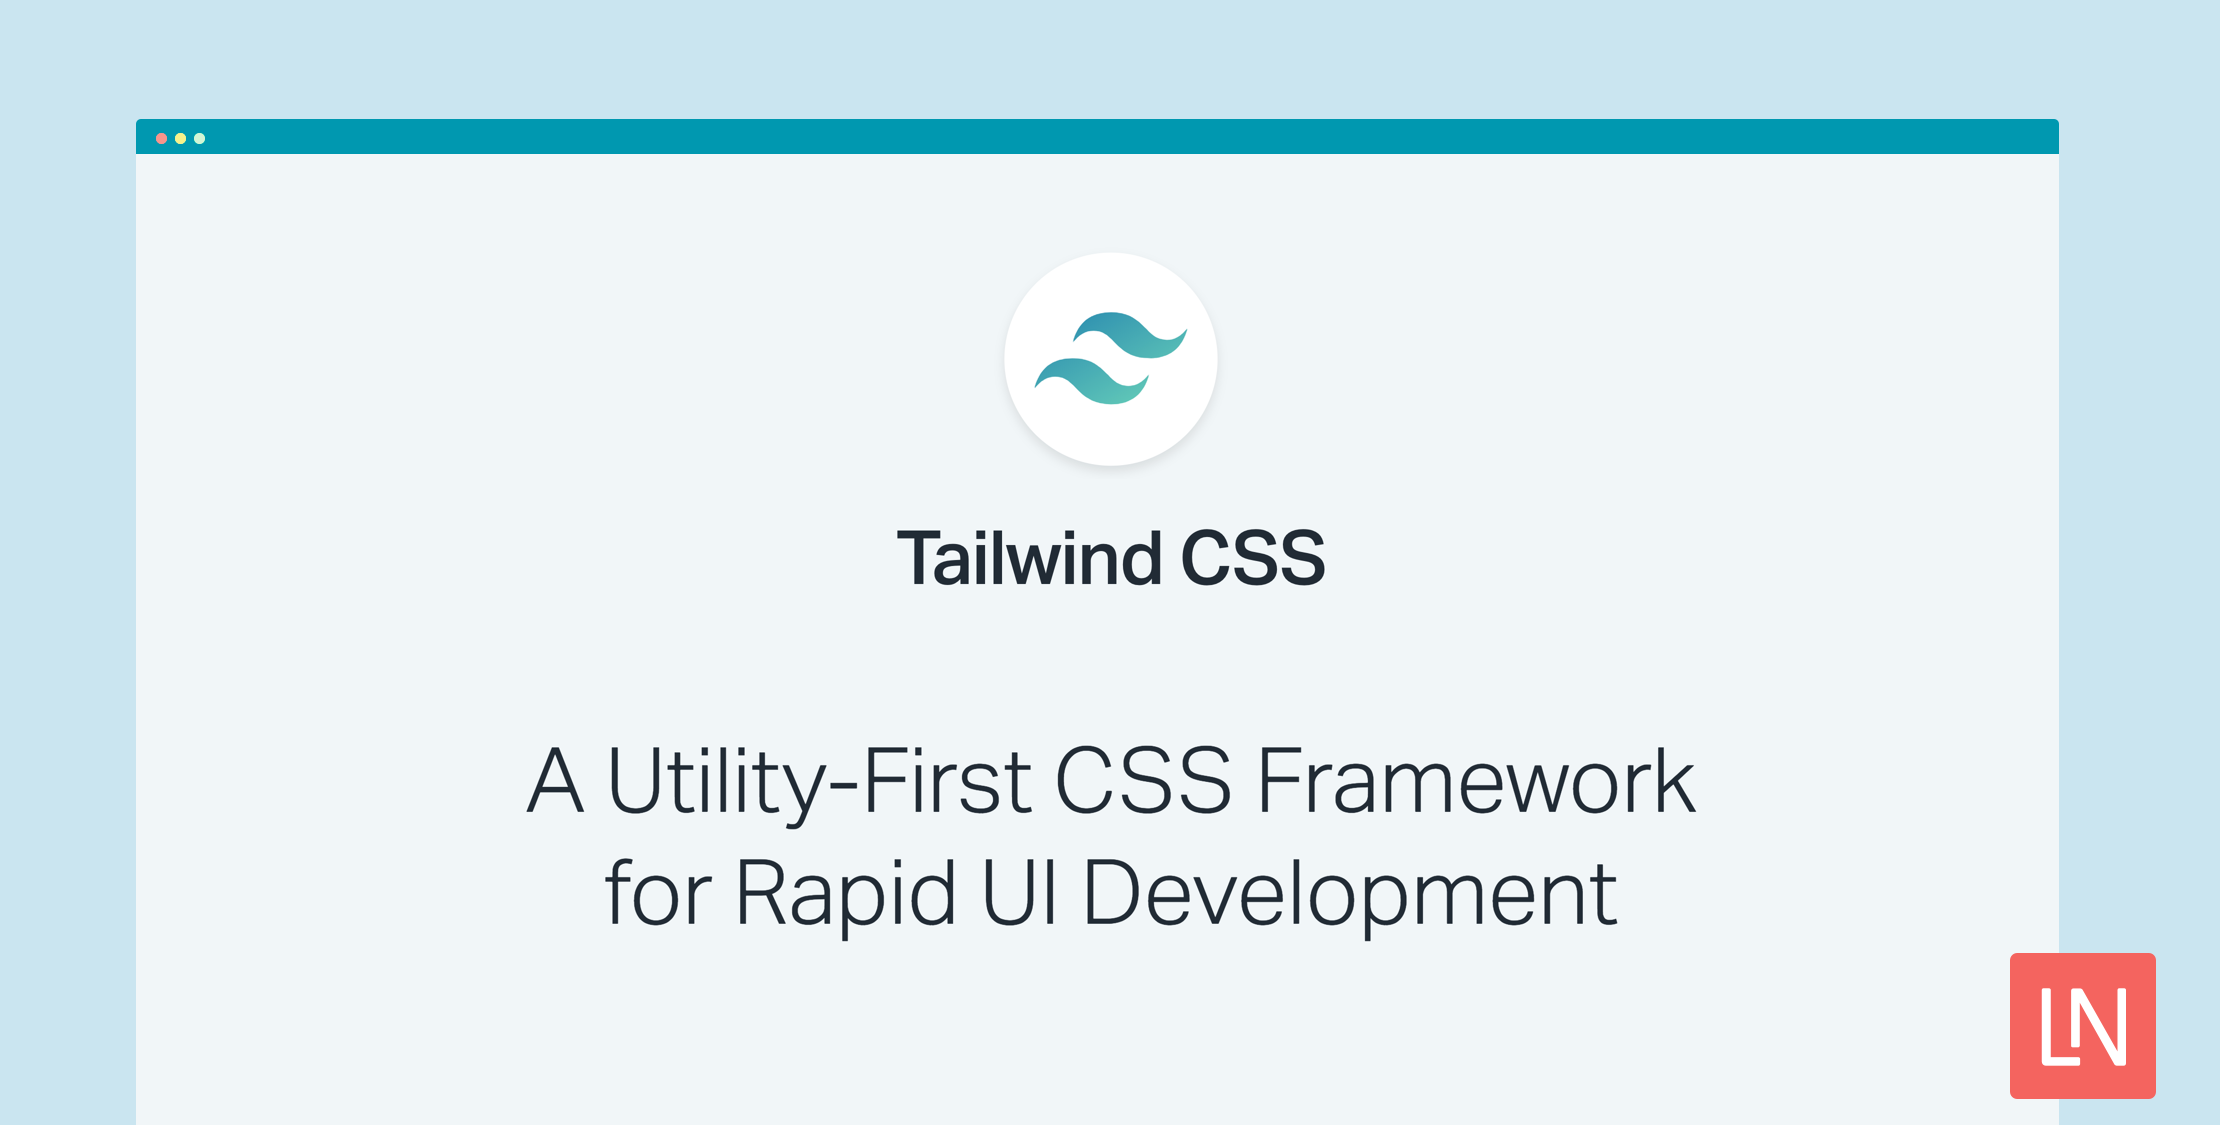 Tailwind CSS Launches Its First Public Release image